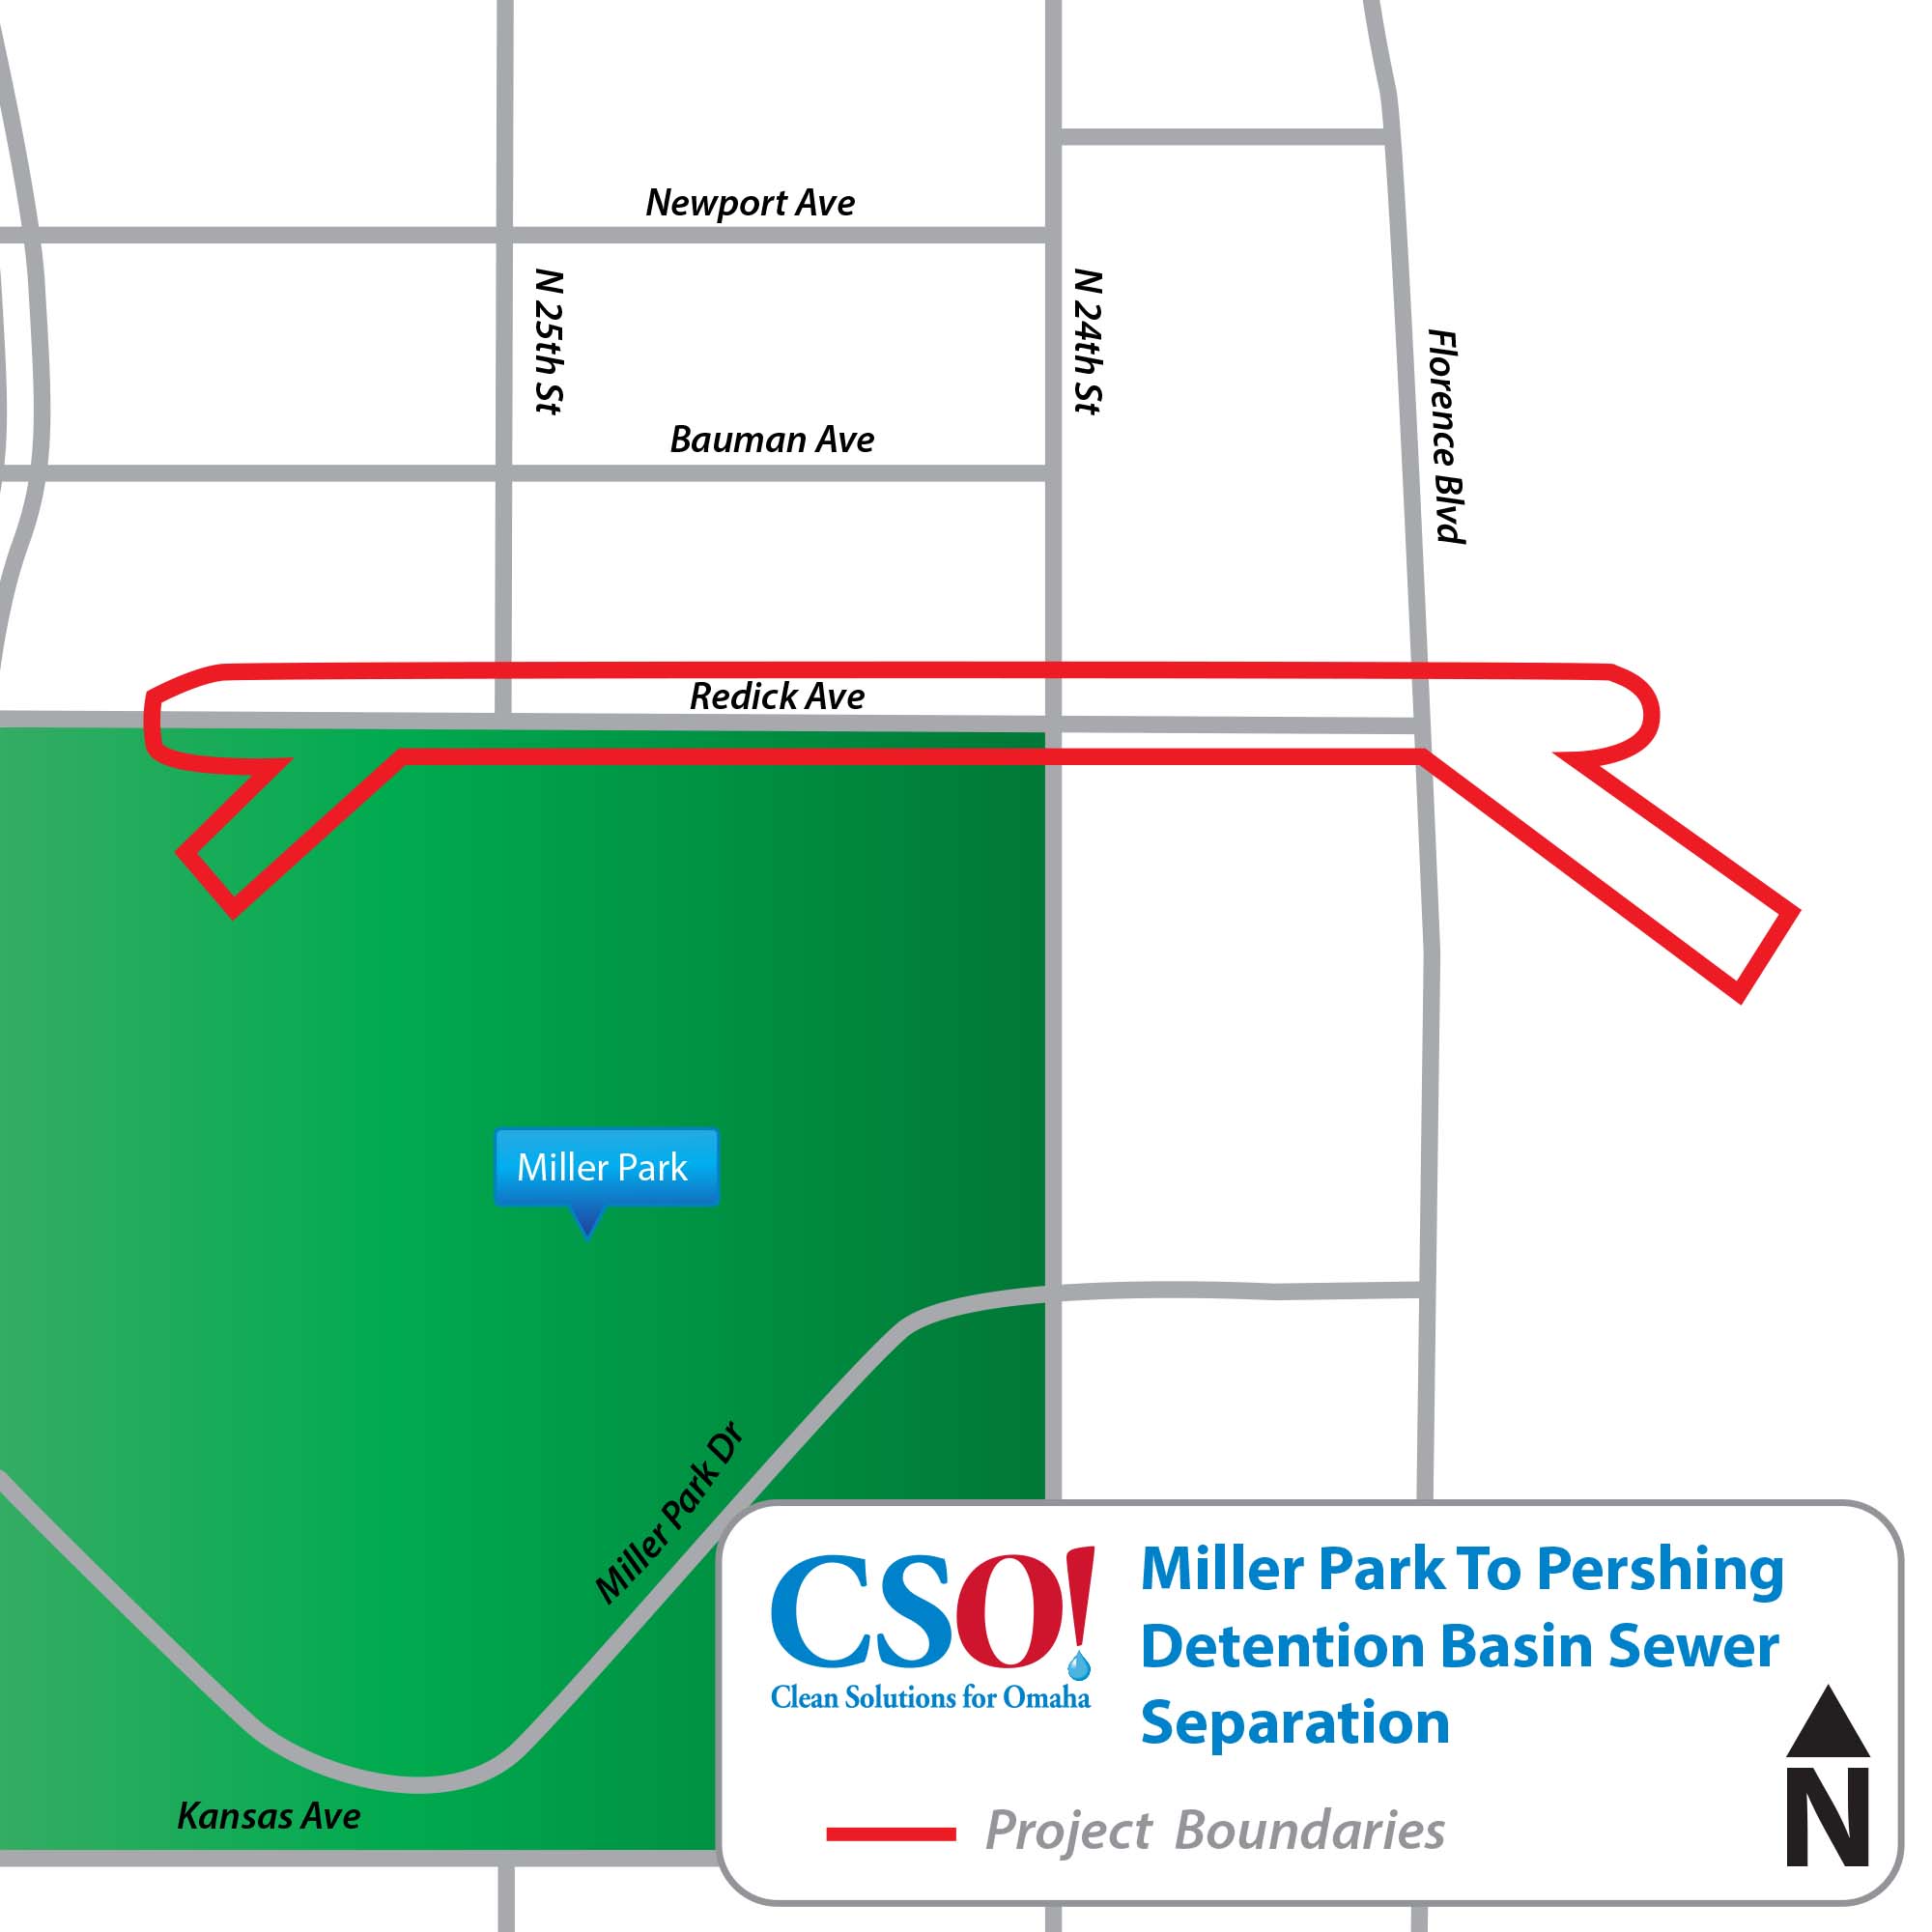 Miller Park to Pershing Detention Basin Sewer Separation Project